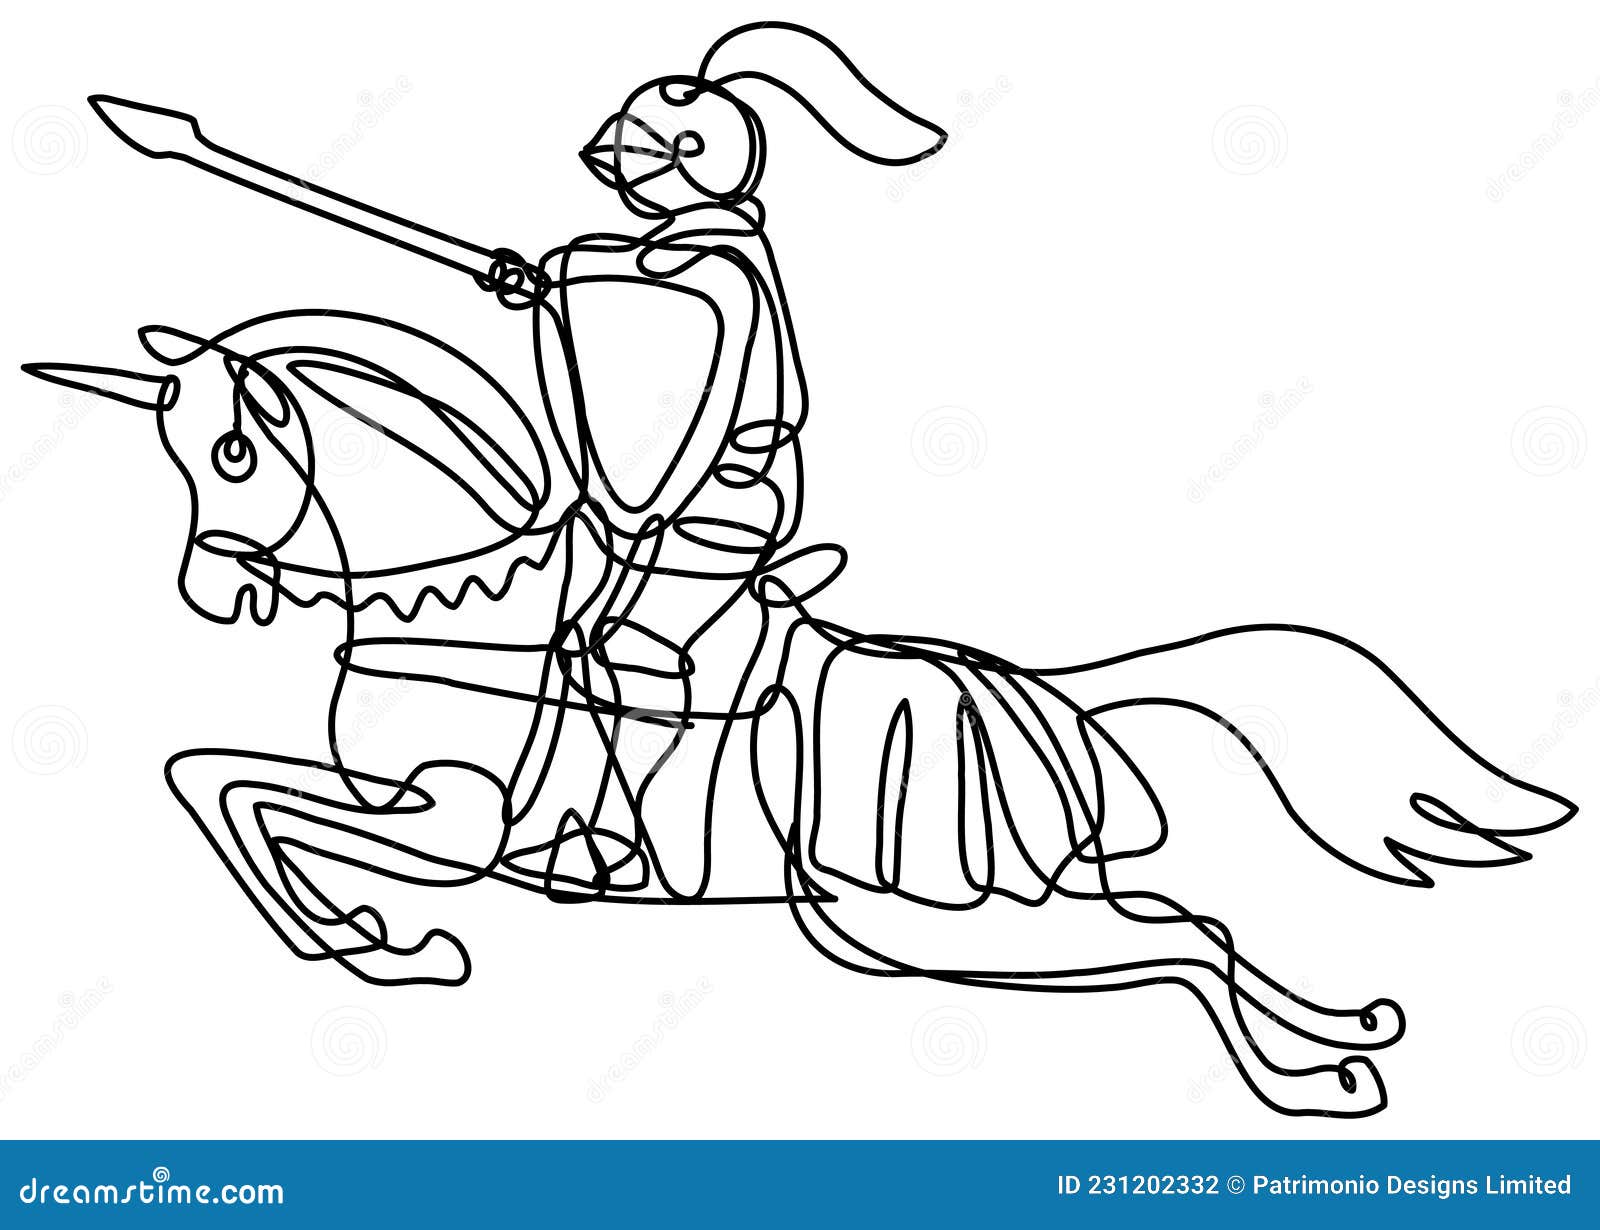 medieval knight with lance and shield riding stead continuous line drawing